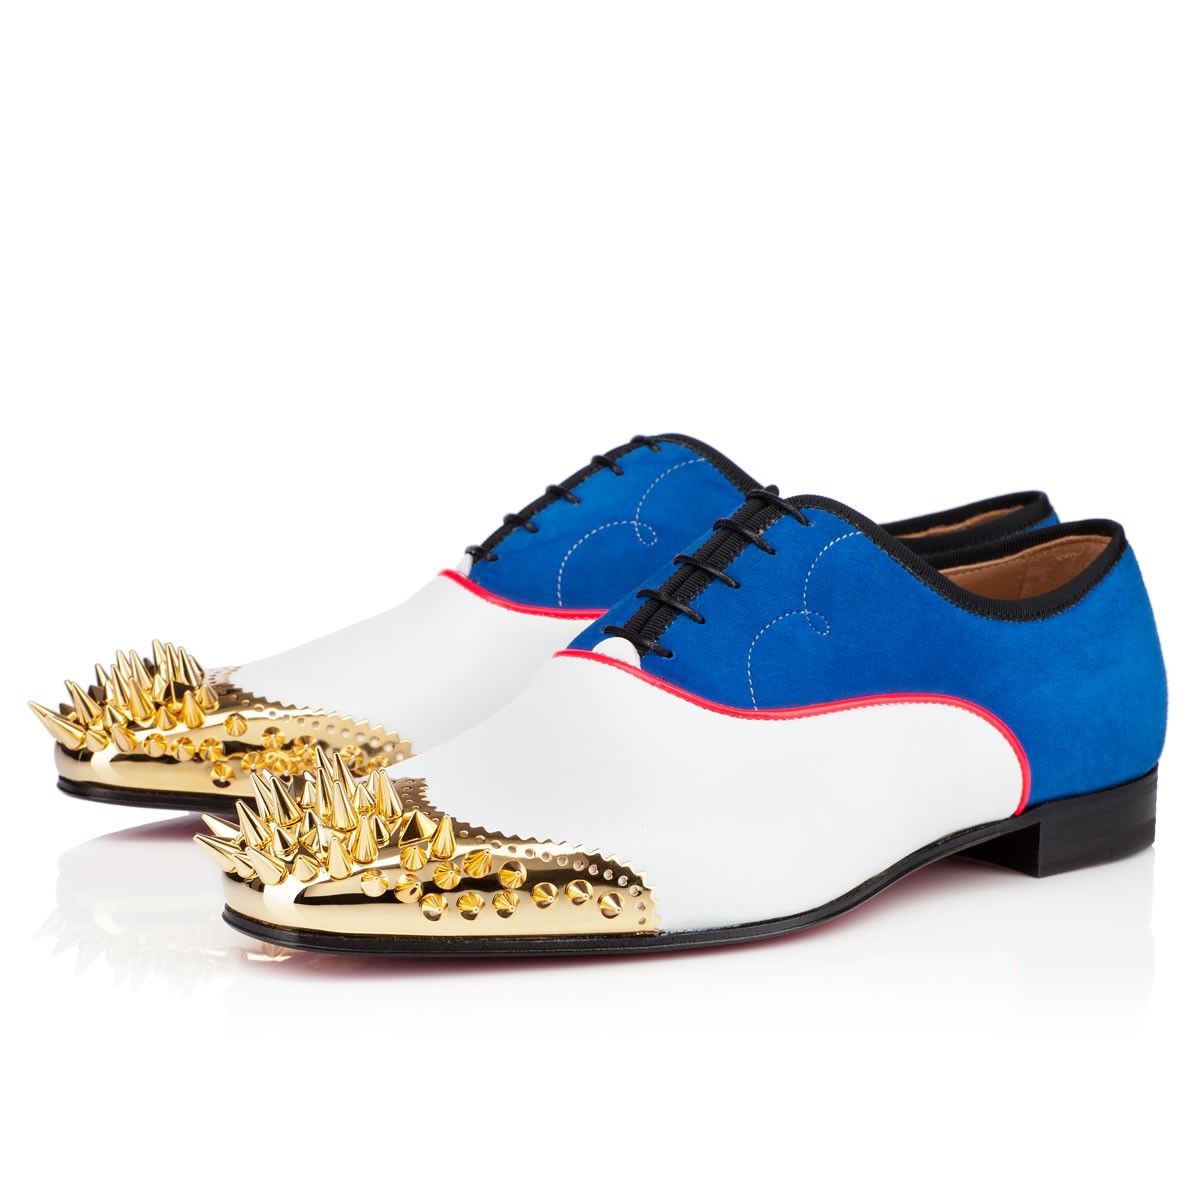 Lyst - Christian Louboutin Tyronito in Blue for Men